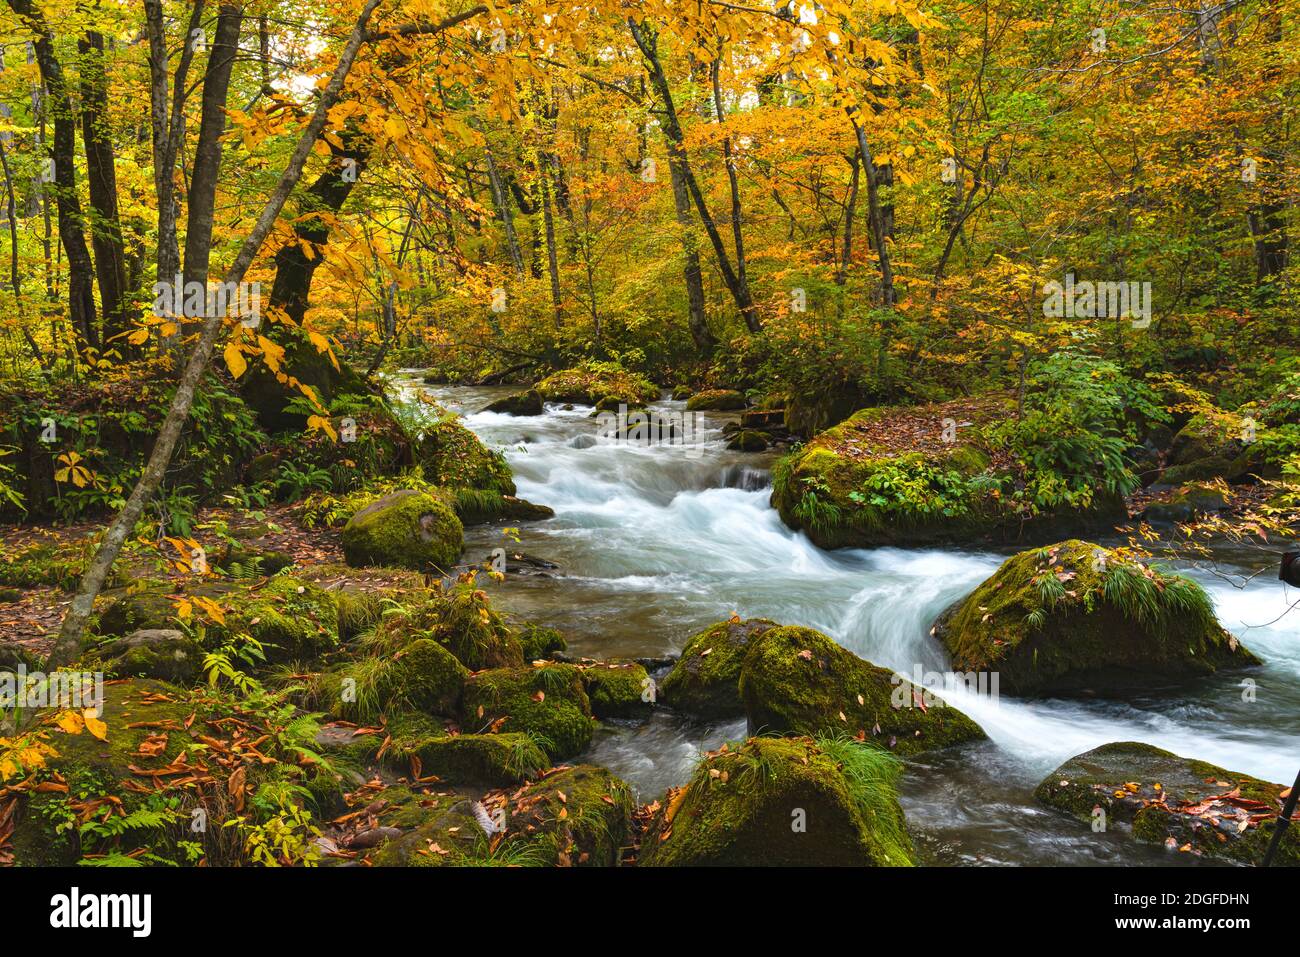 Oirase River flow passing rocks covered with green moss and colorful falling leaves Stock Photo